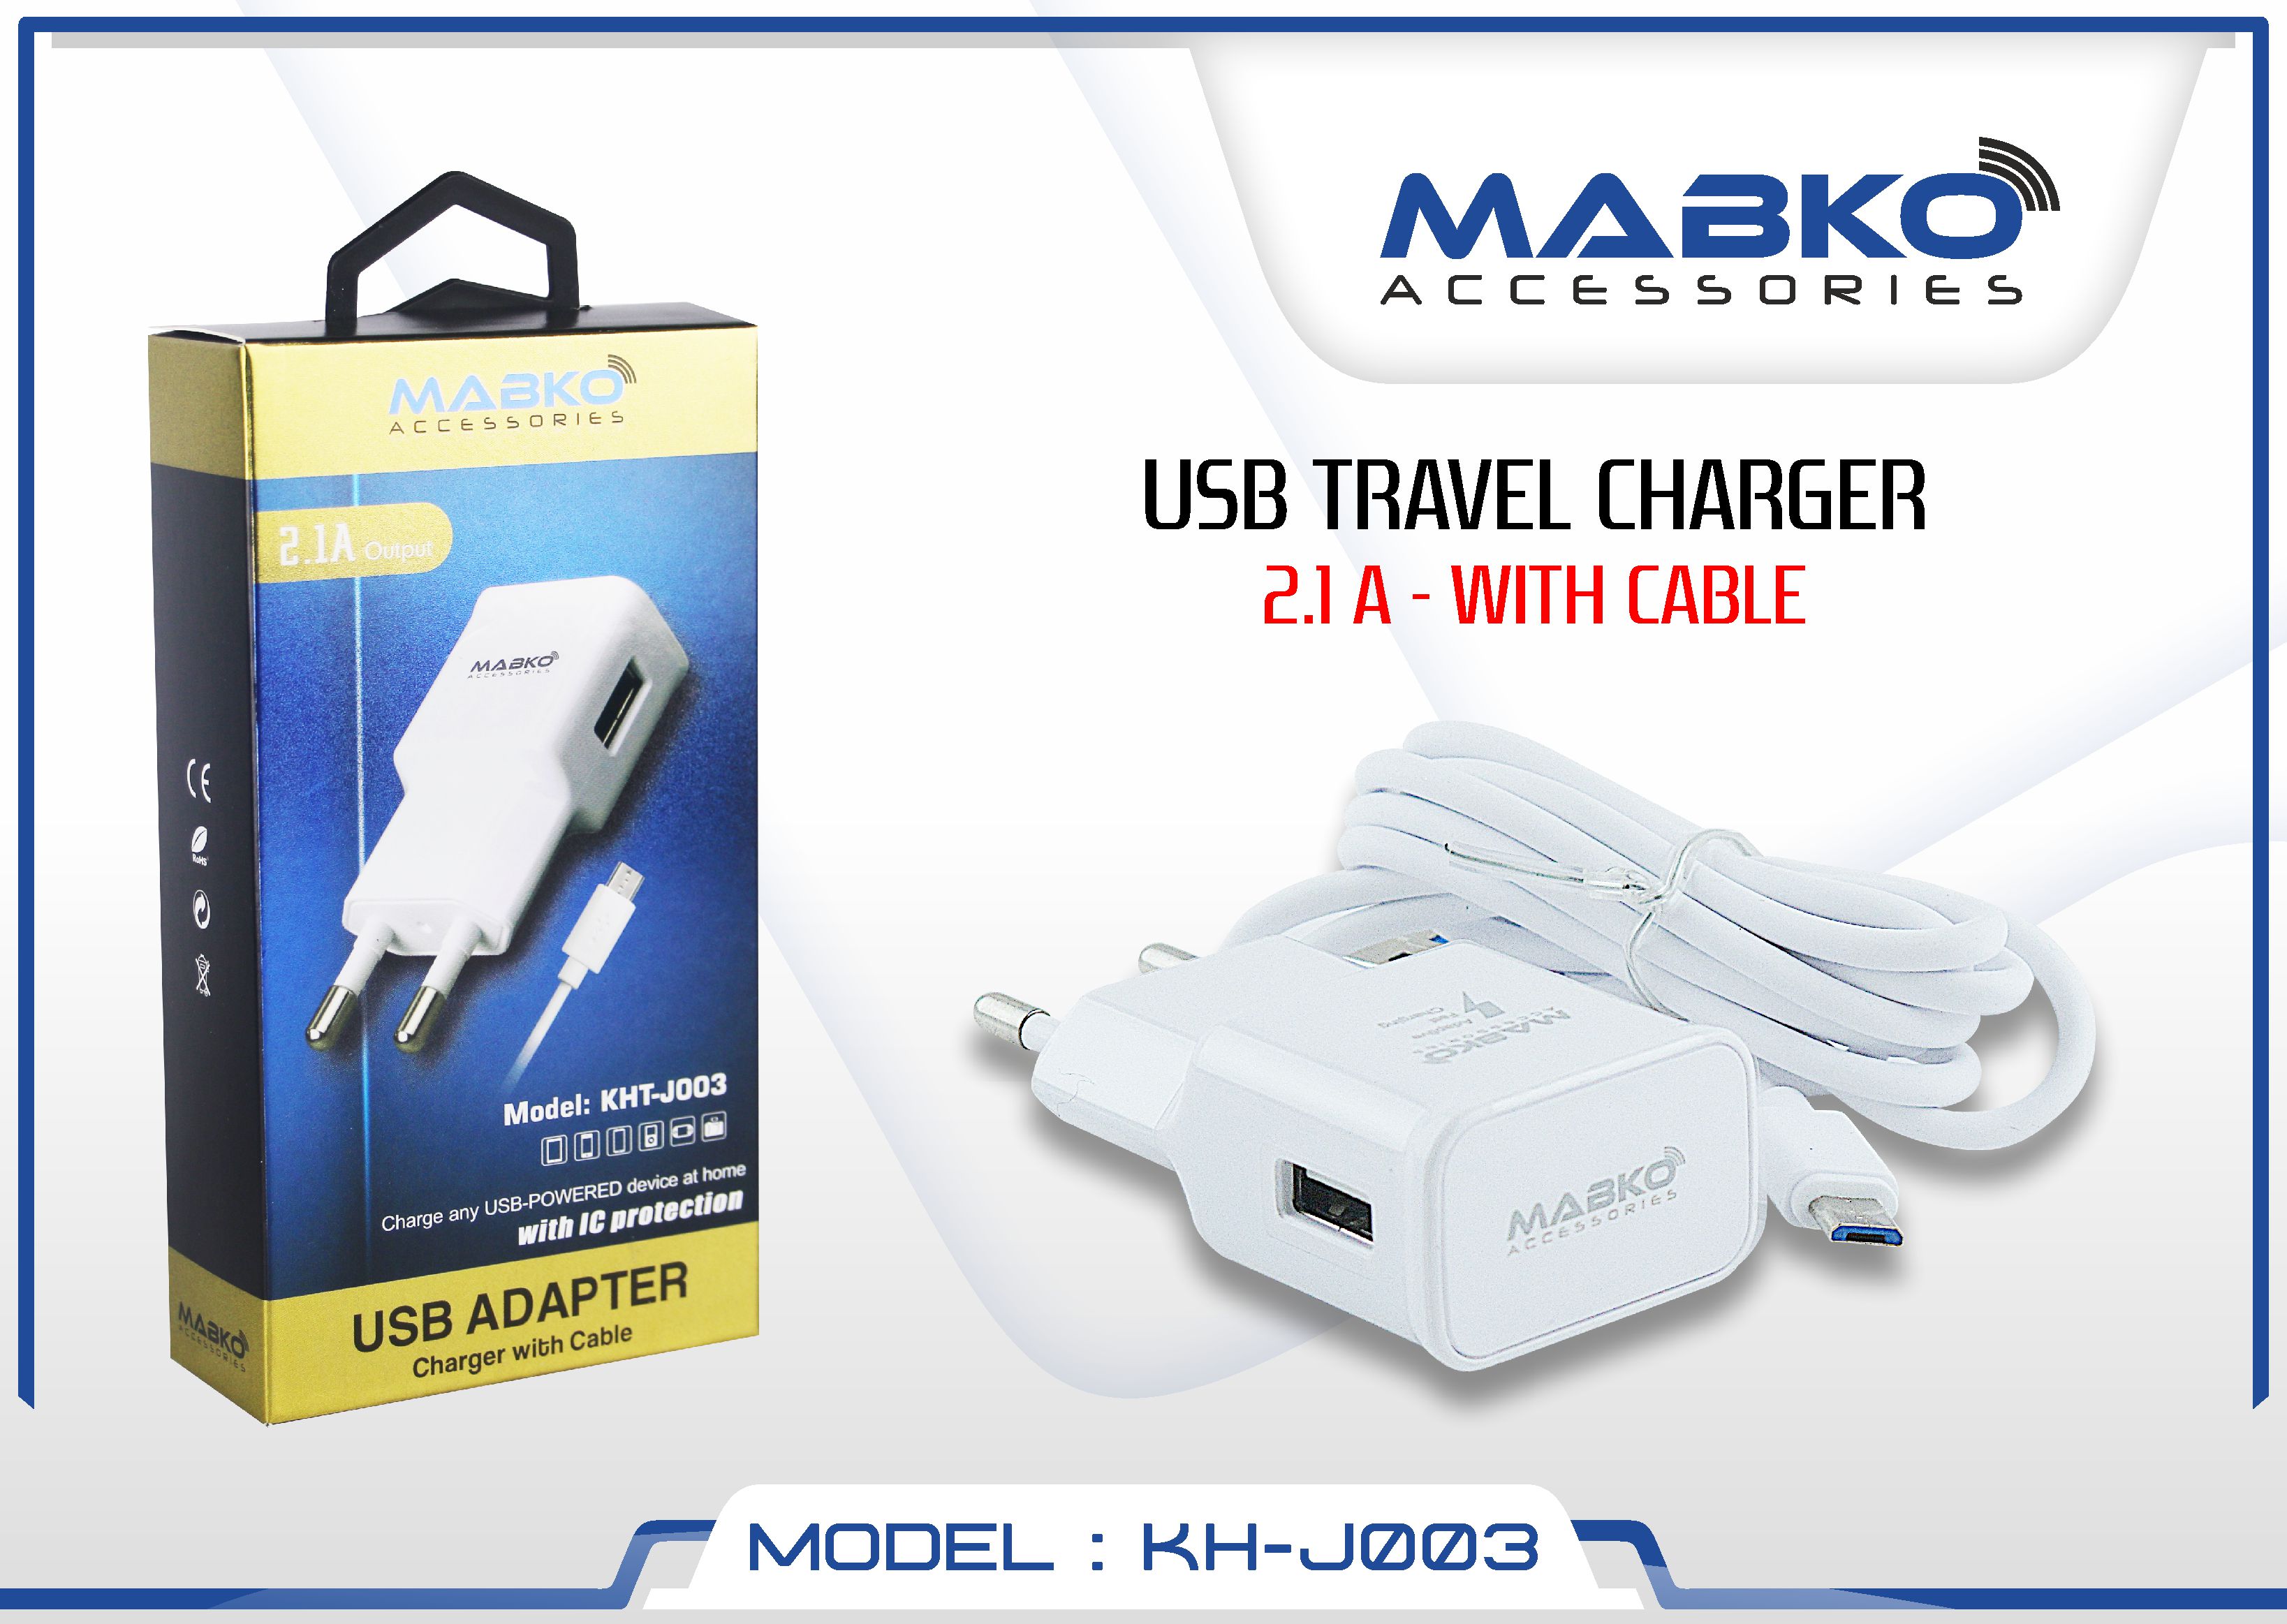 CHARGER 2,1A WITH CABLE 1,5M AND USB